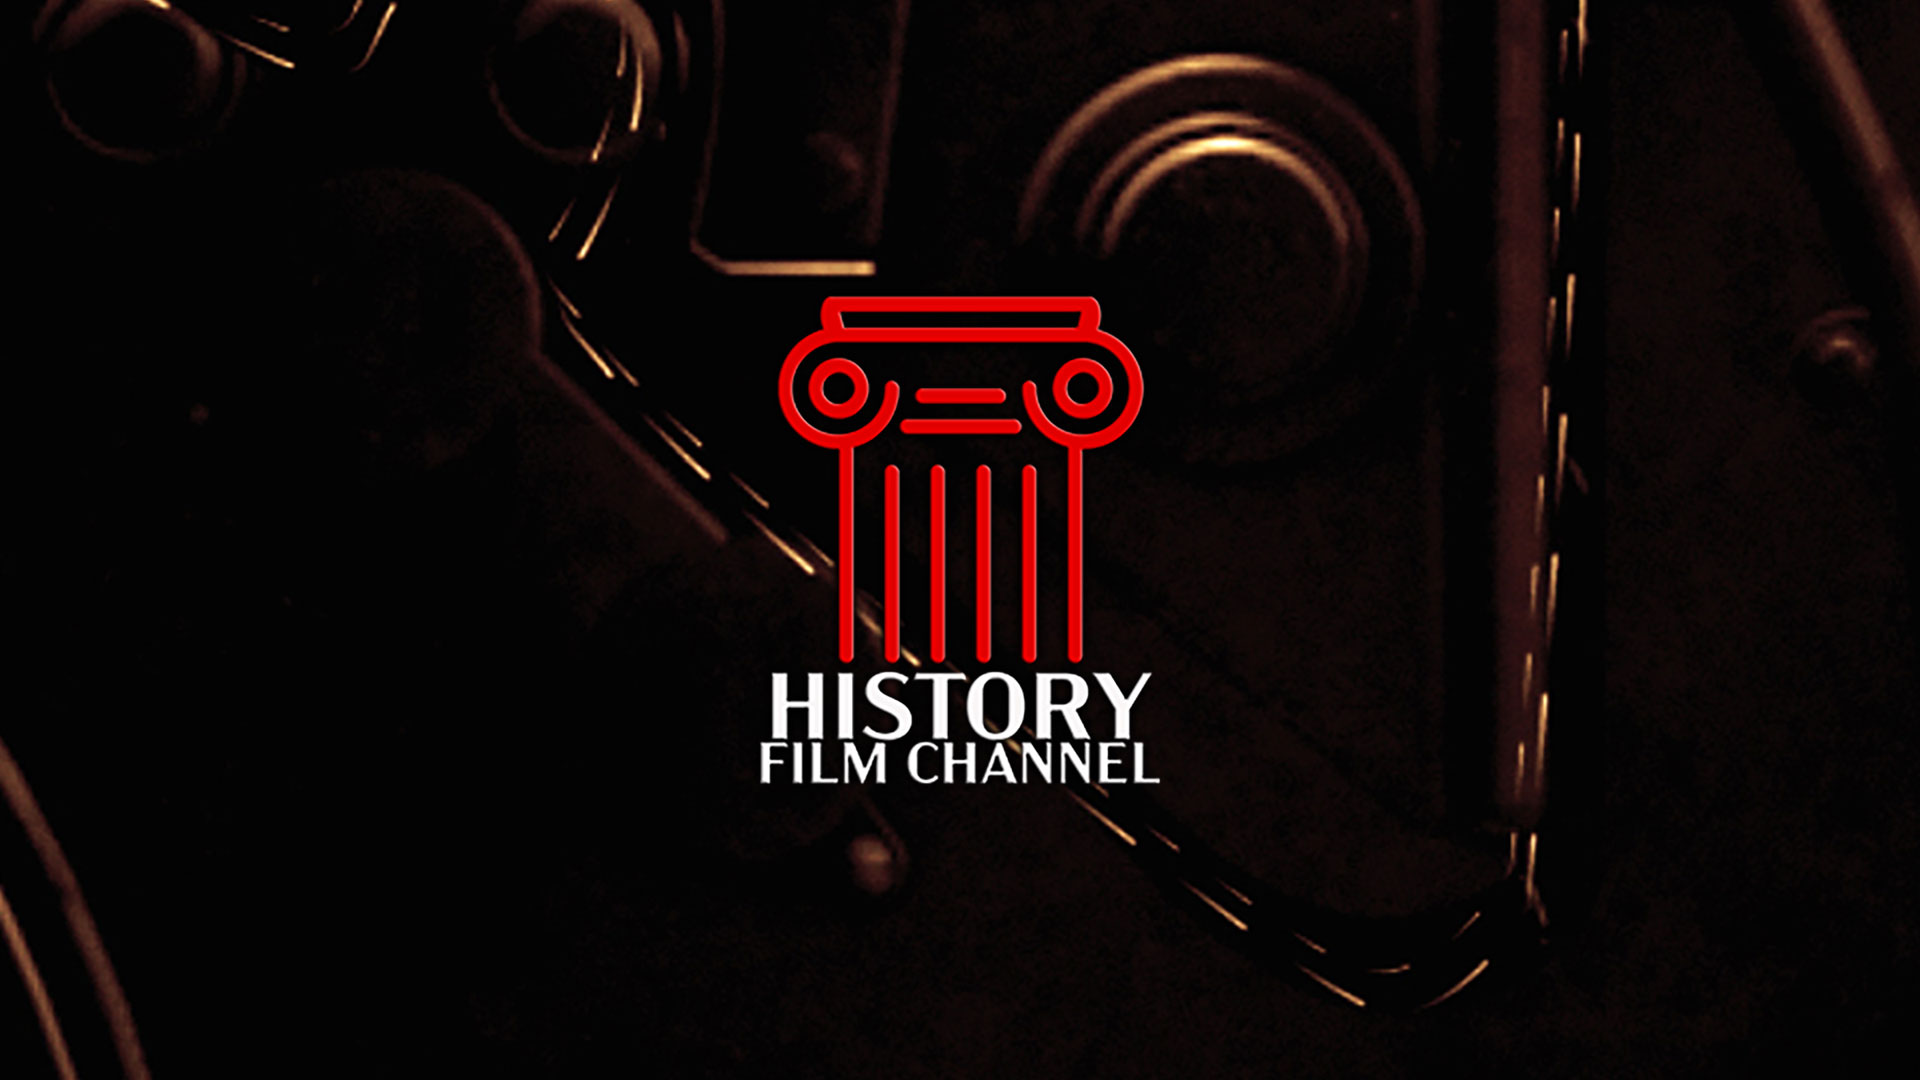 History Film Channel